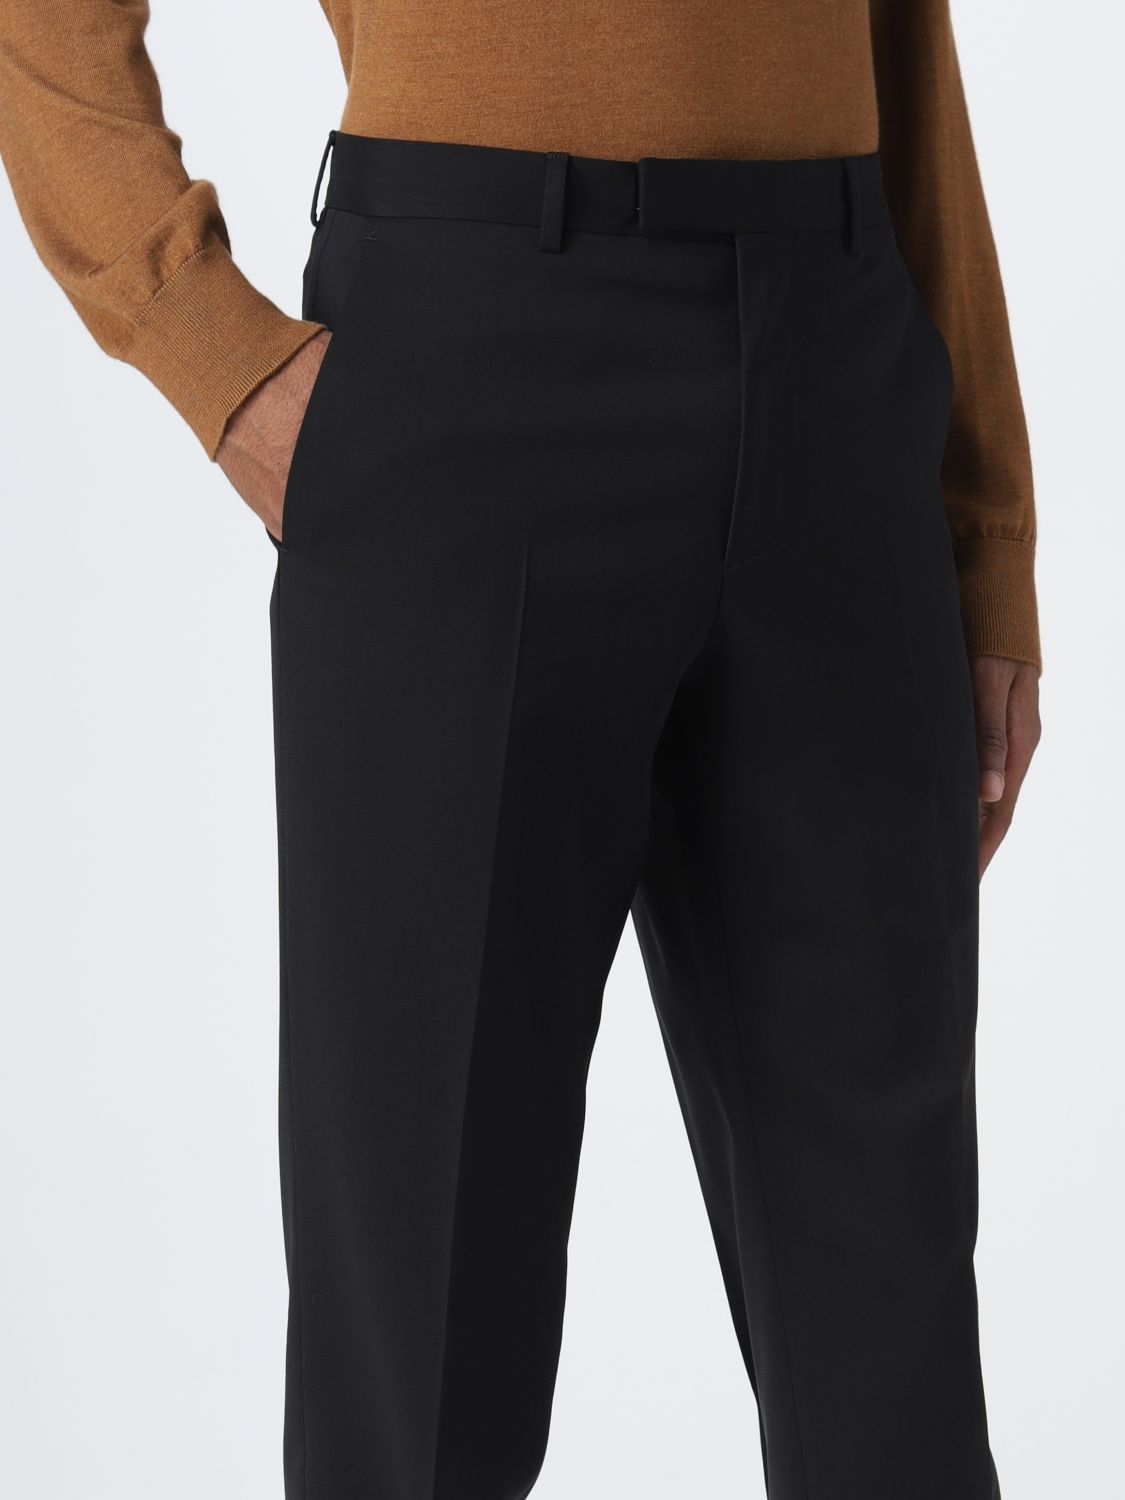 Trousers Zegna: Zegna trousers for men black 5